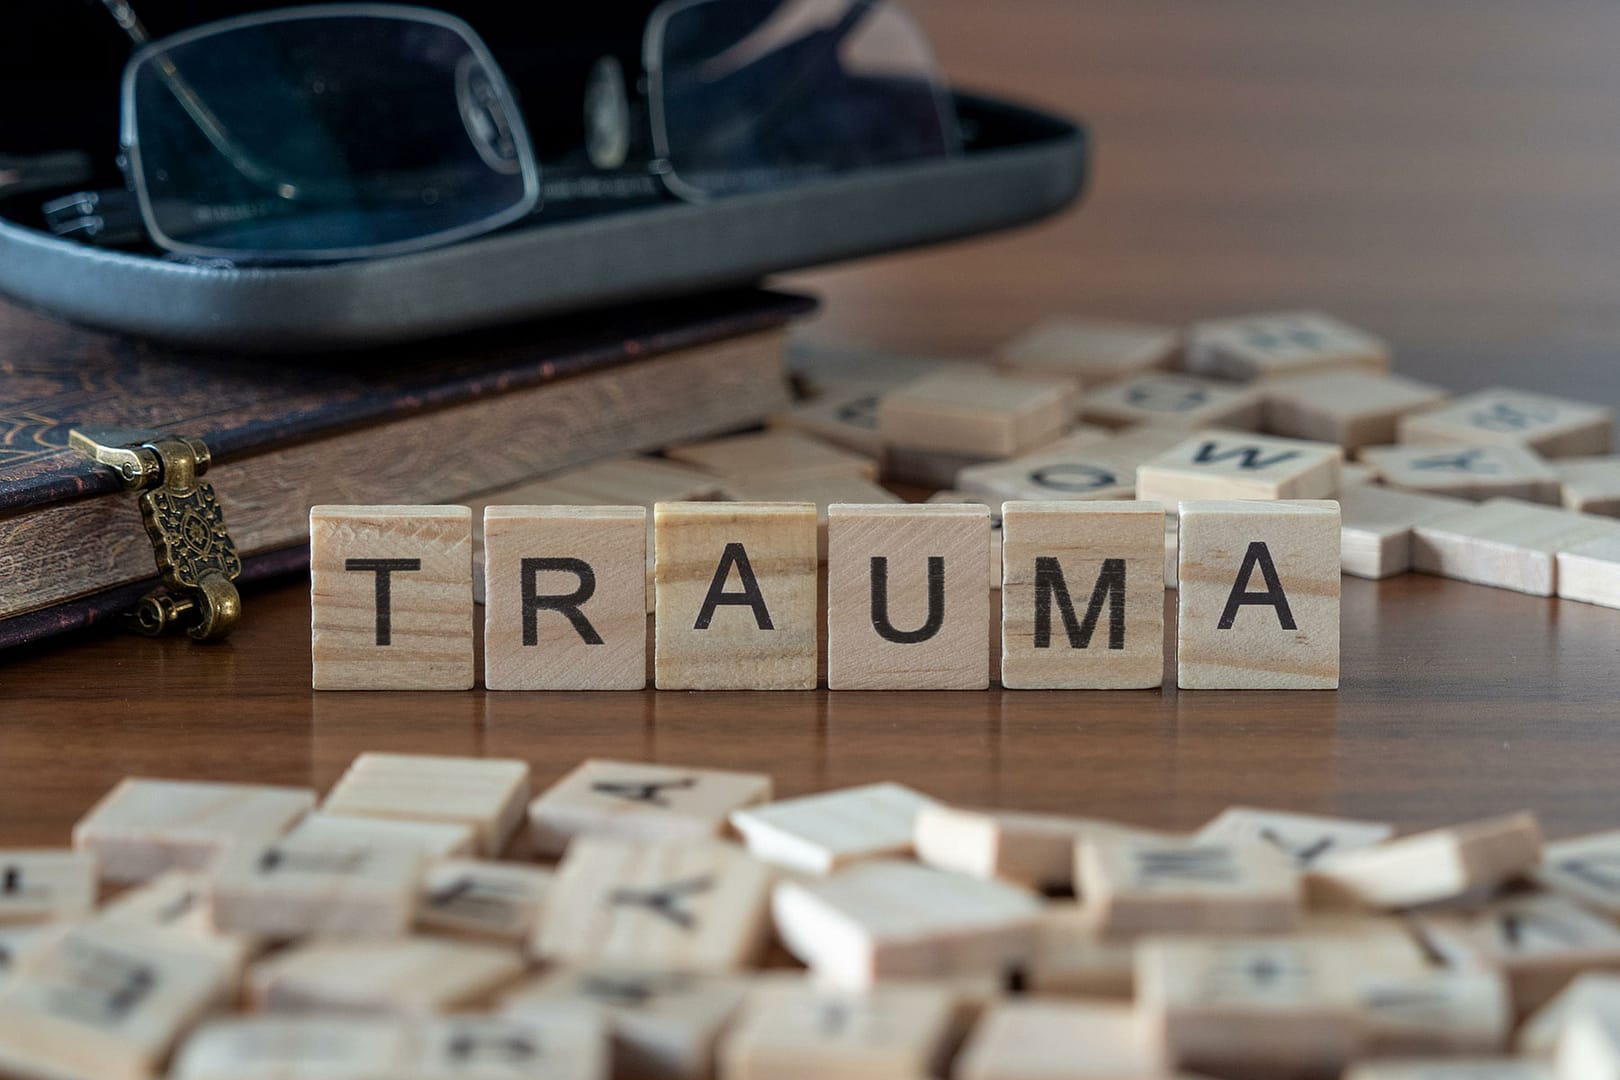 Scrabble letters showing trauma and substance use